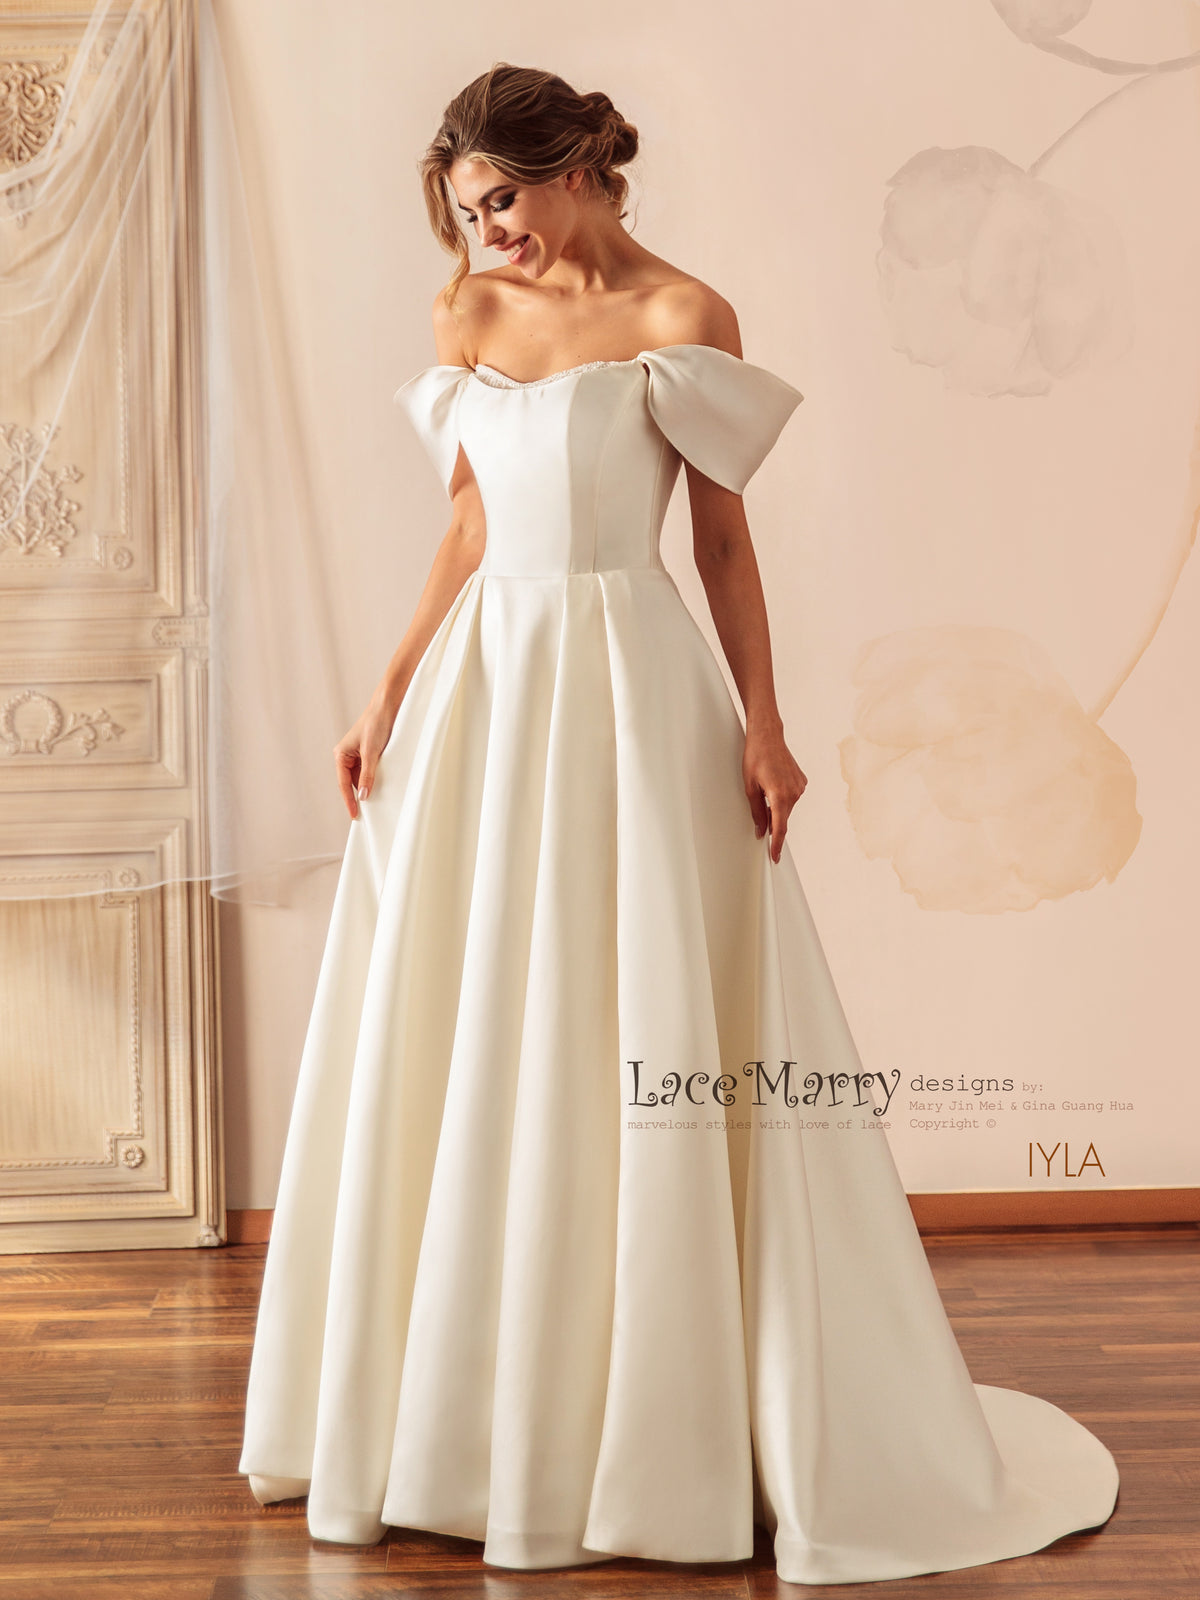 IYLA / Off Shoulder Wedding Dress with A Line Skirt and Inner Corset